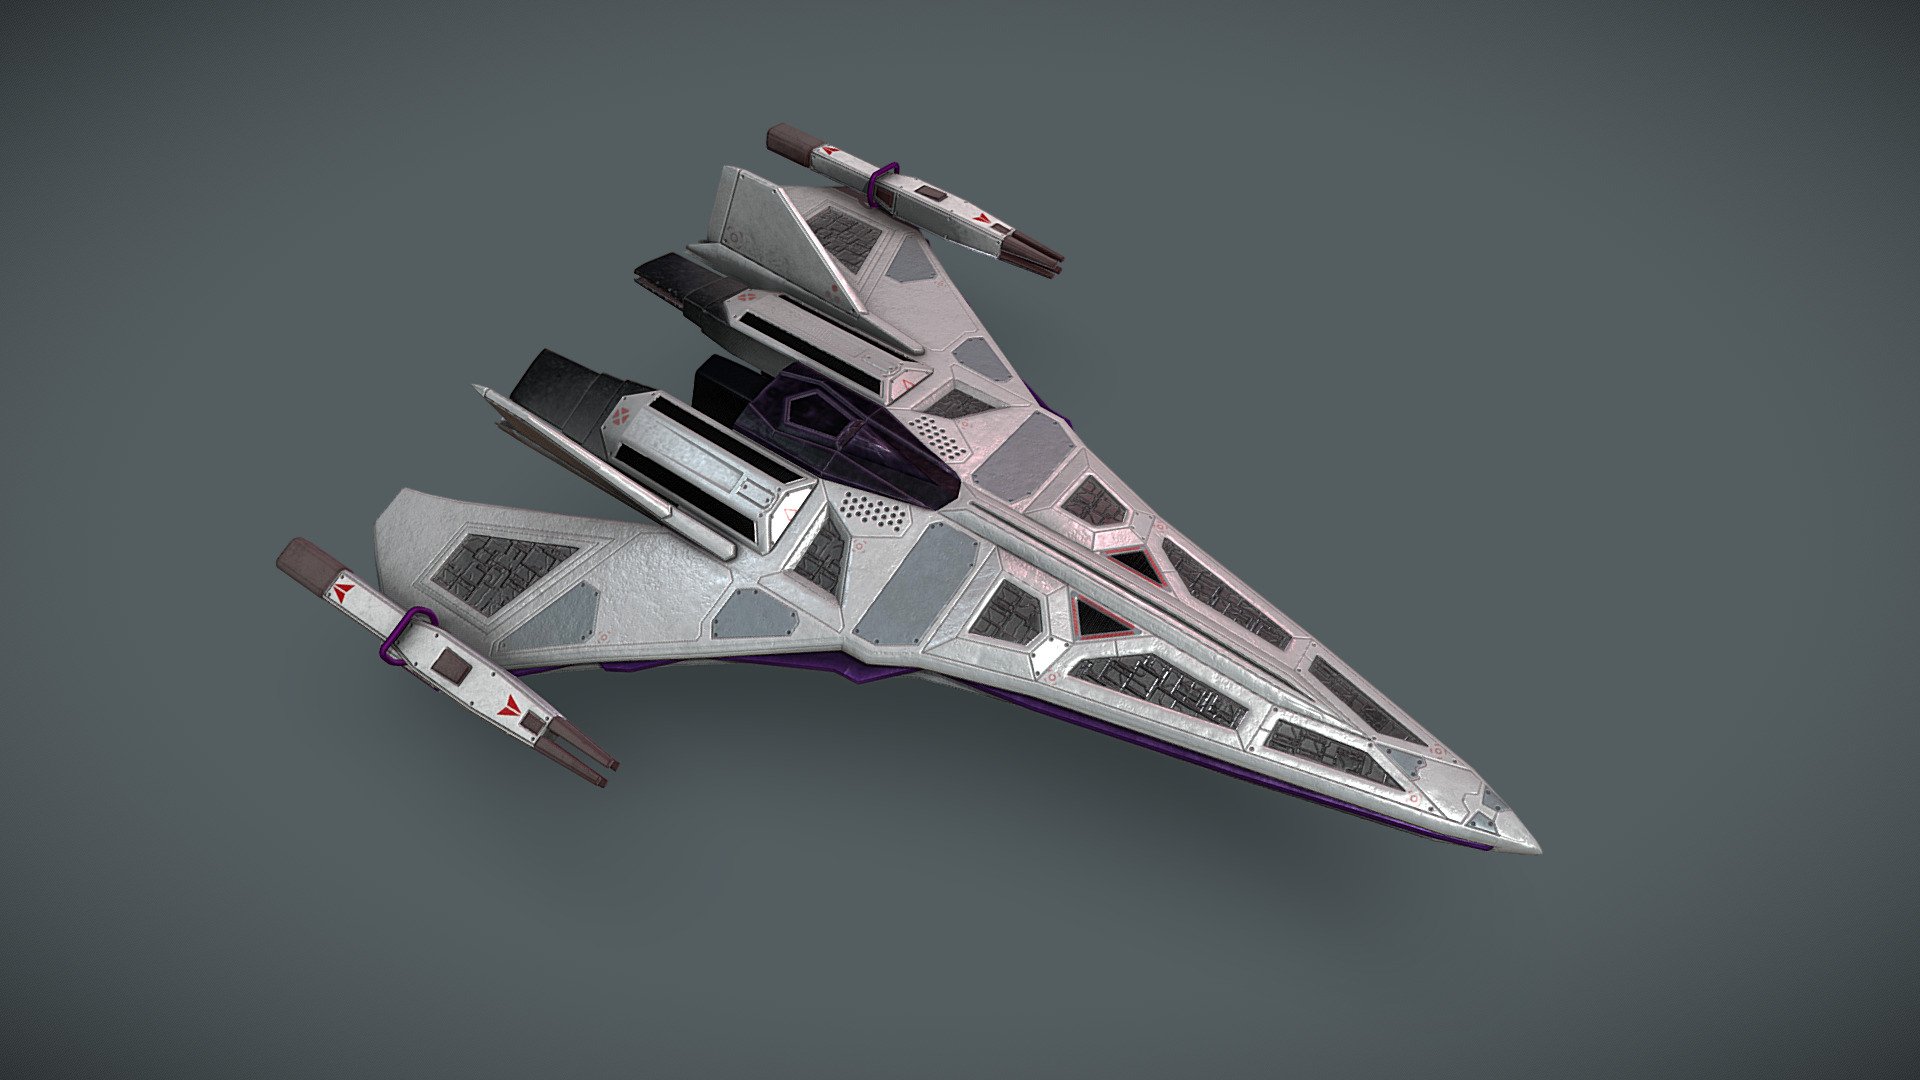 “The DST-20H Falcon is a medium tier assault craft, capable of fighting in both planet atmosphere and the vacuum of space.”

made as a personal challenge for myself, I modeled and textured this spaceship to see how much I had improved since my last spaceship model. Inspired by the ships from Destiny 2 3d model